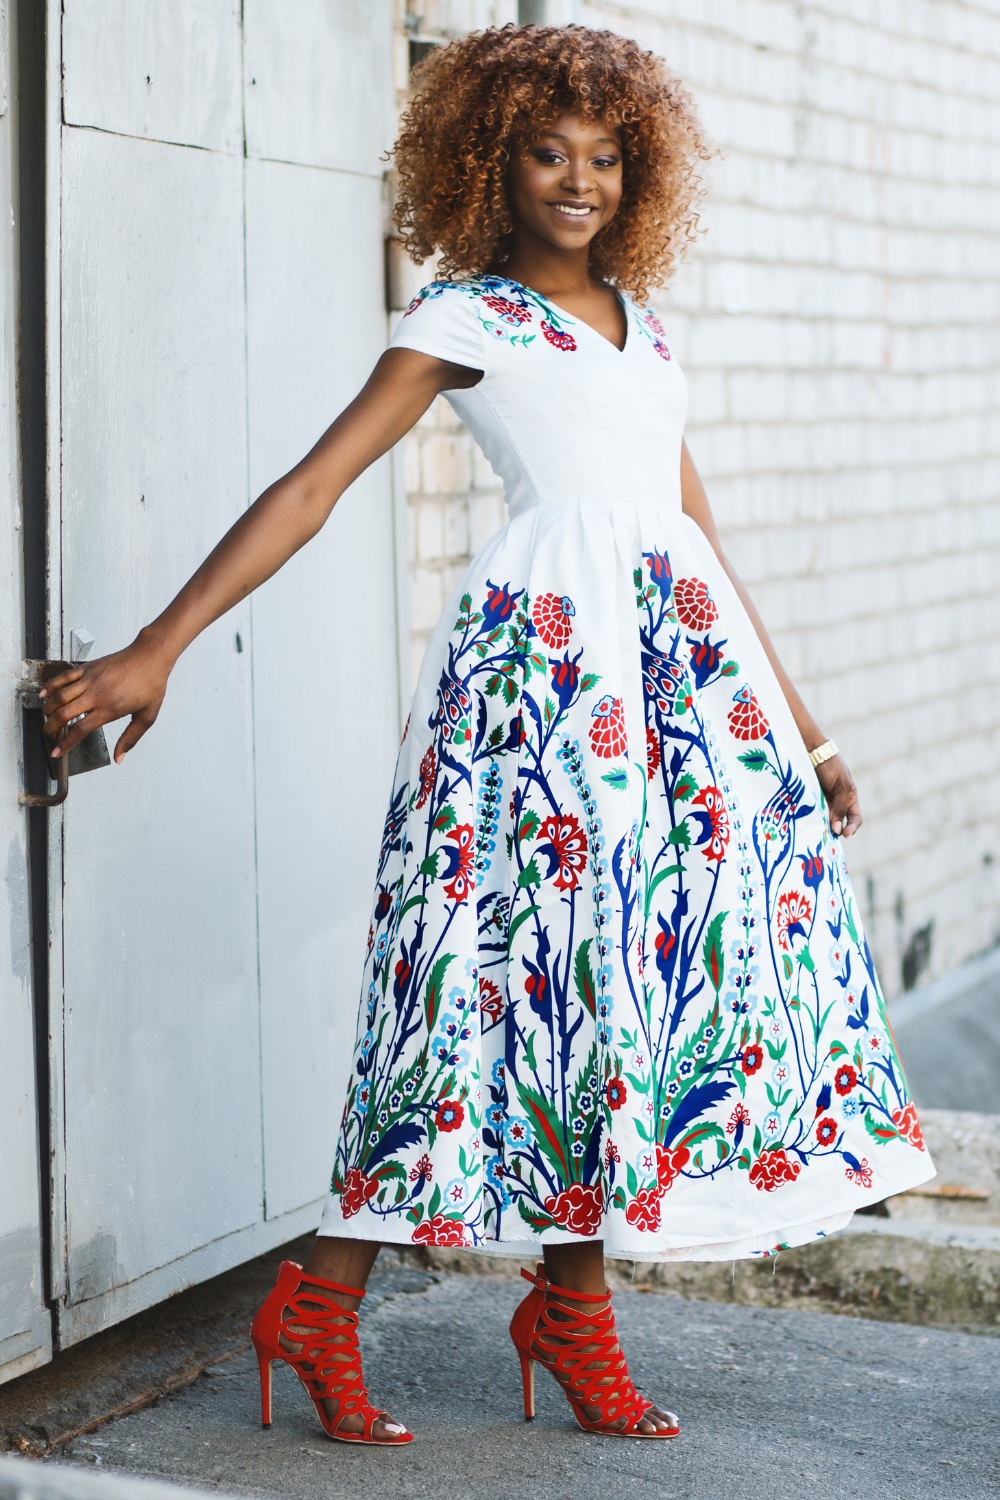 10 Must-Have Types of Dresses for Every Woman's Wardrobe